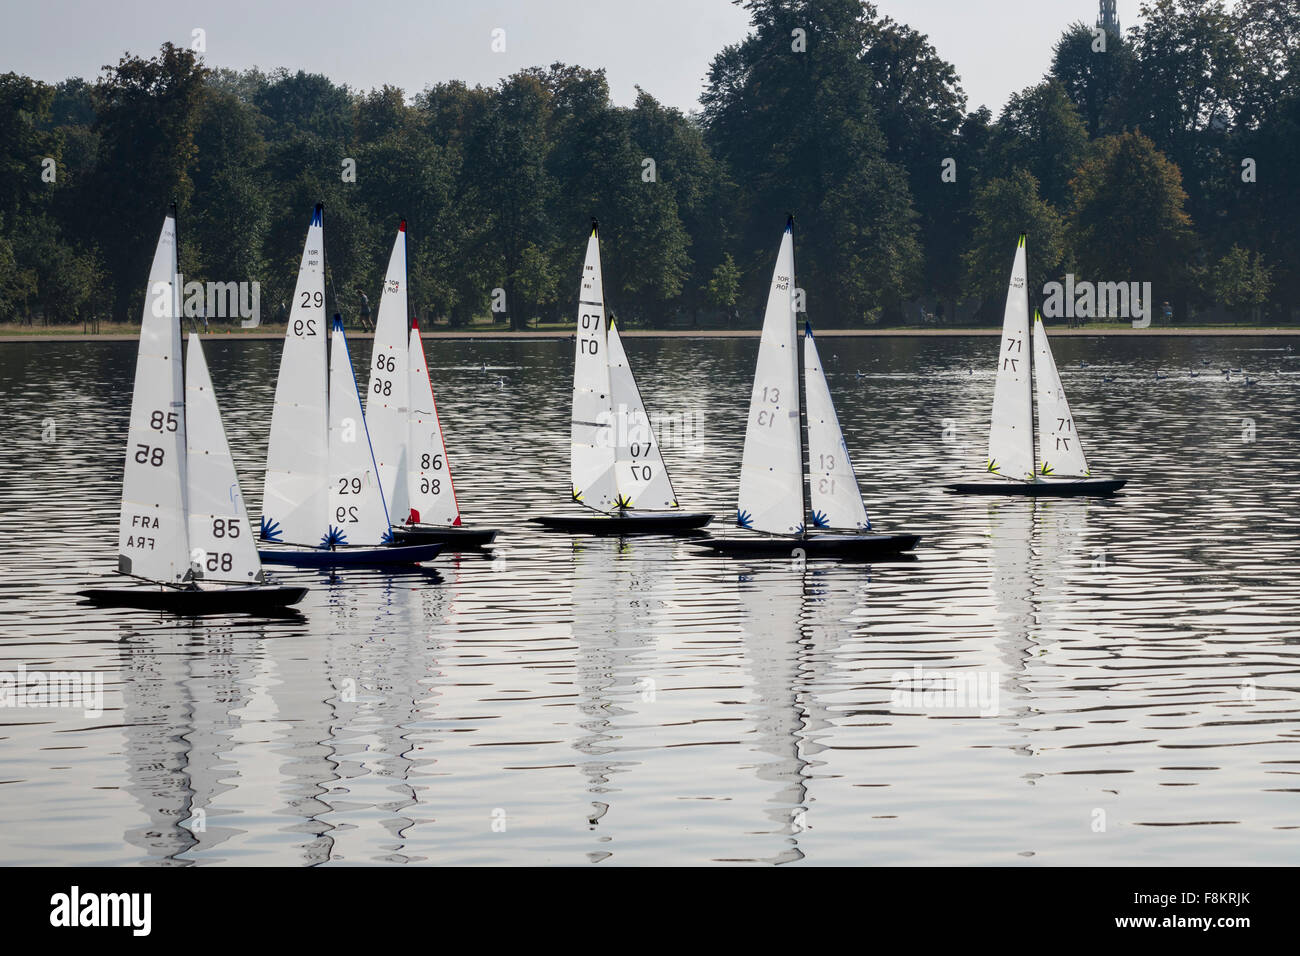 Model yachts or boats race across Round Pond in Kensington Gardens, London, England Stock Photo